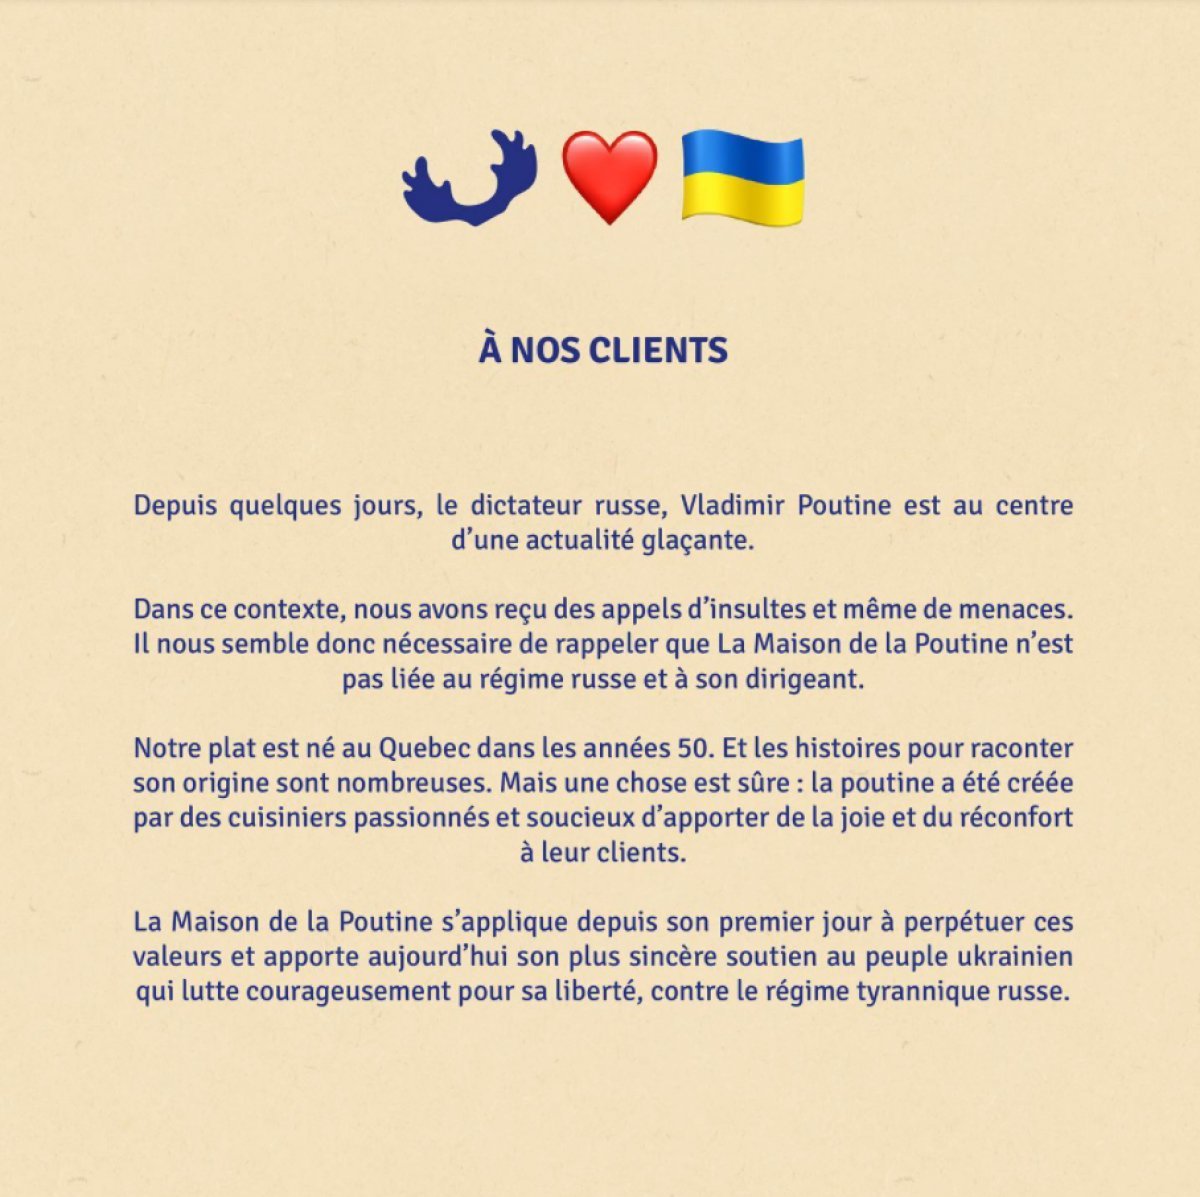 Restaurant named 'Putin's house' in France became the target of threats #2